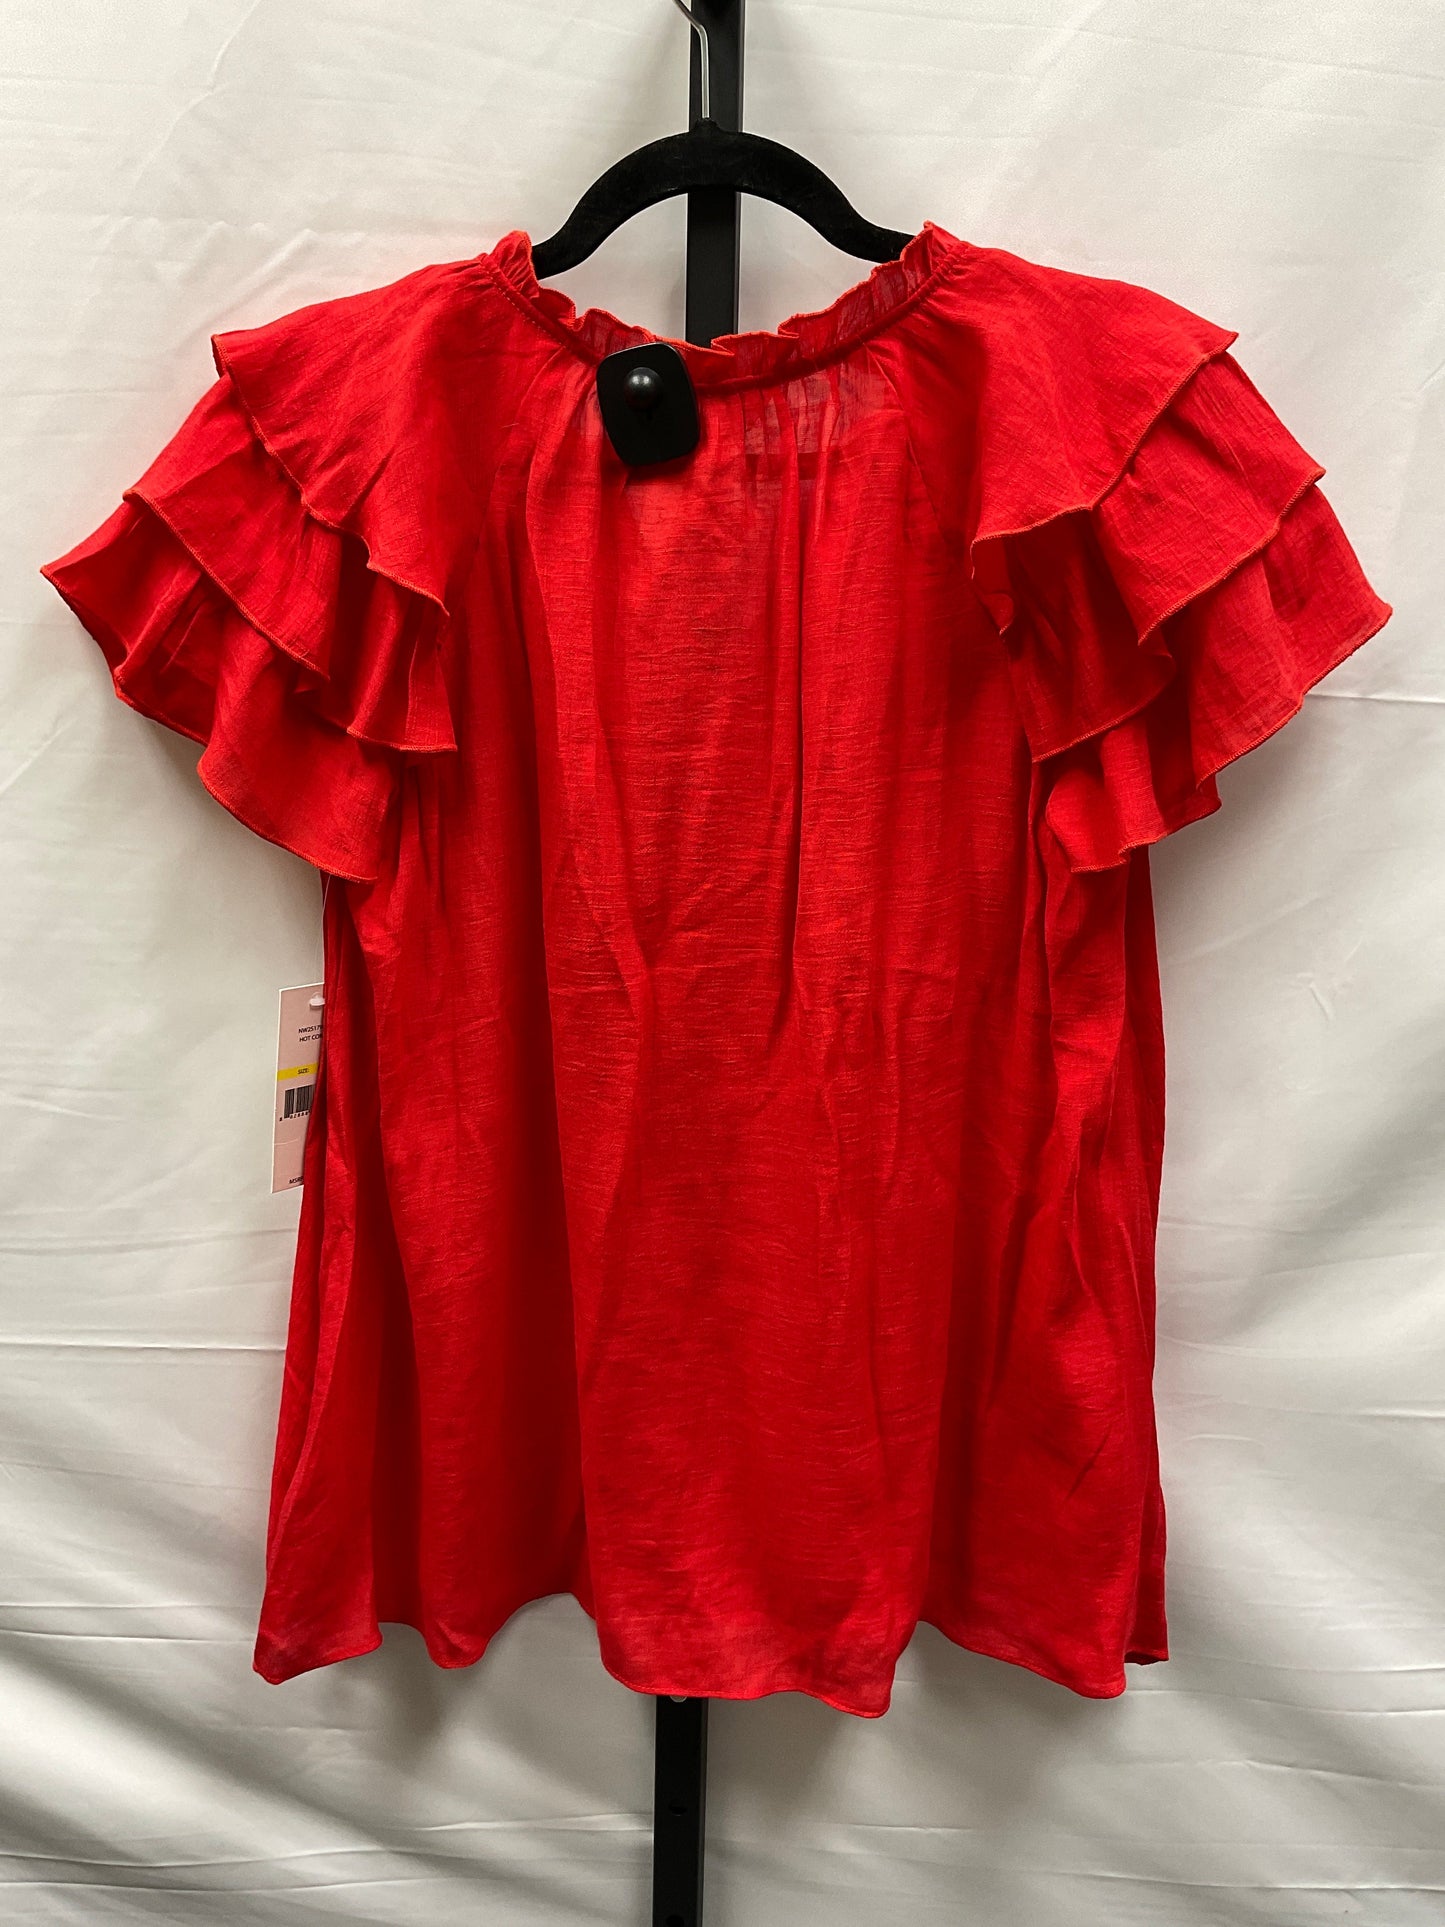 Red Top Short Sleeve Nanette By Nanette Lepore, Size M